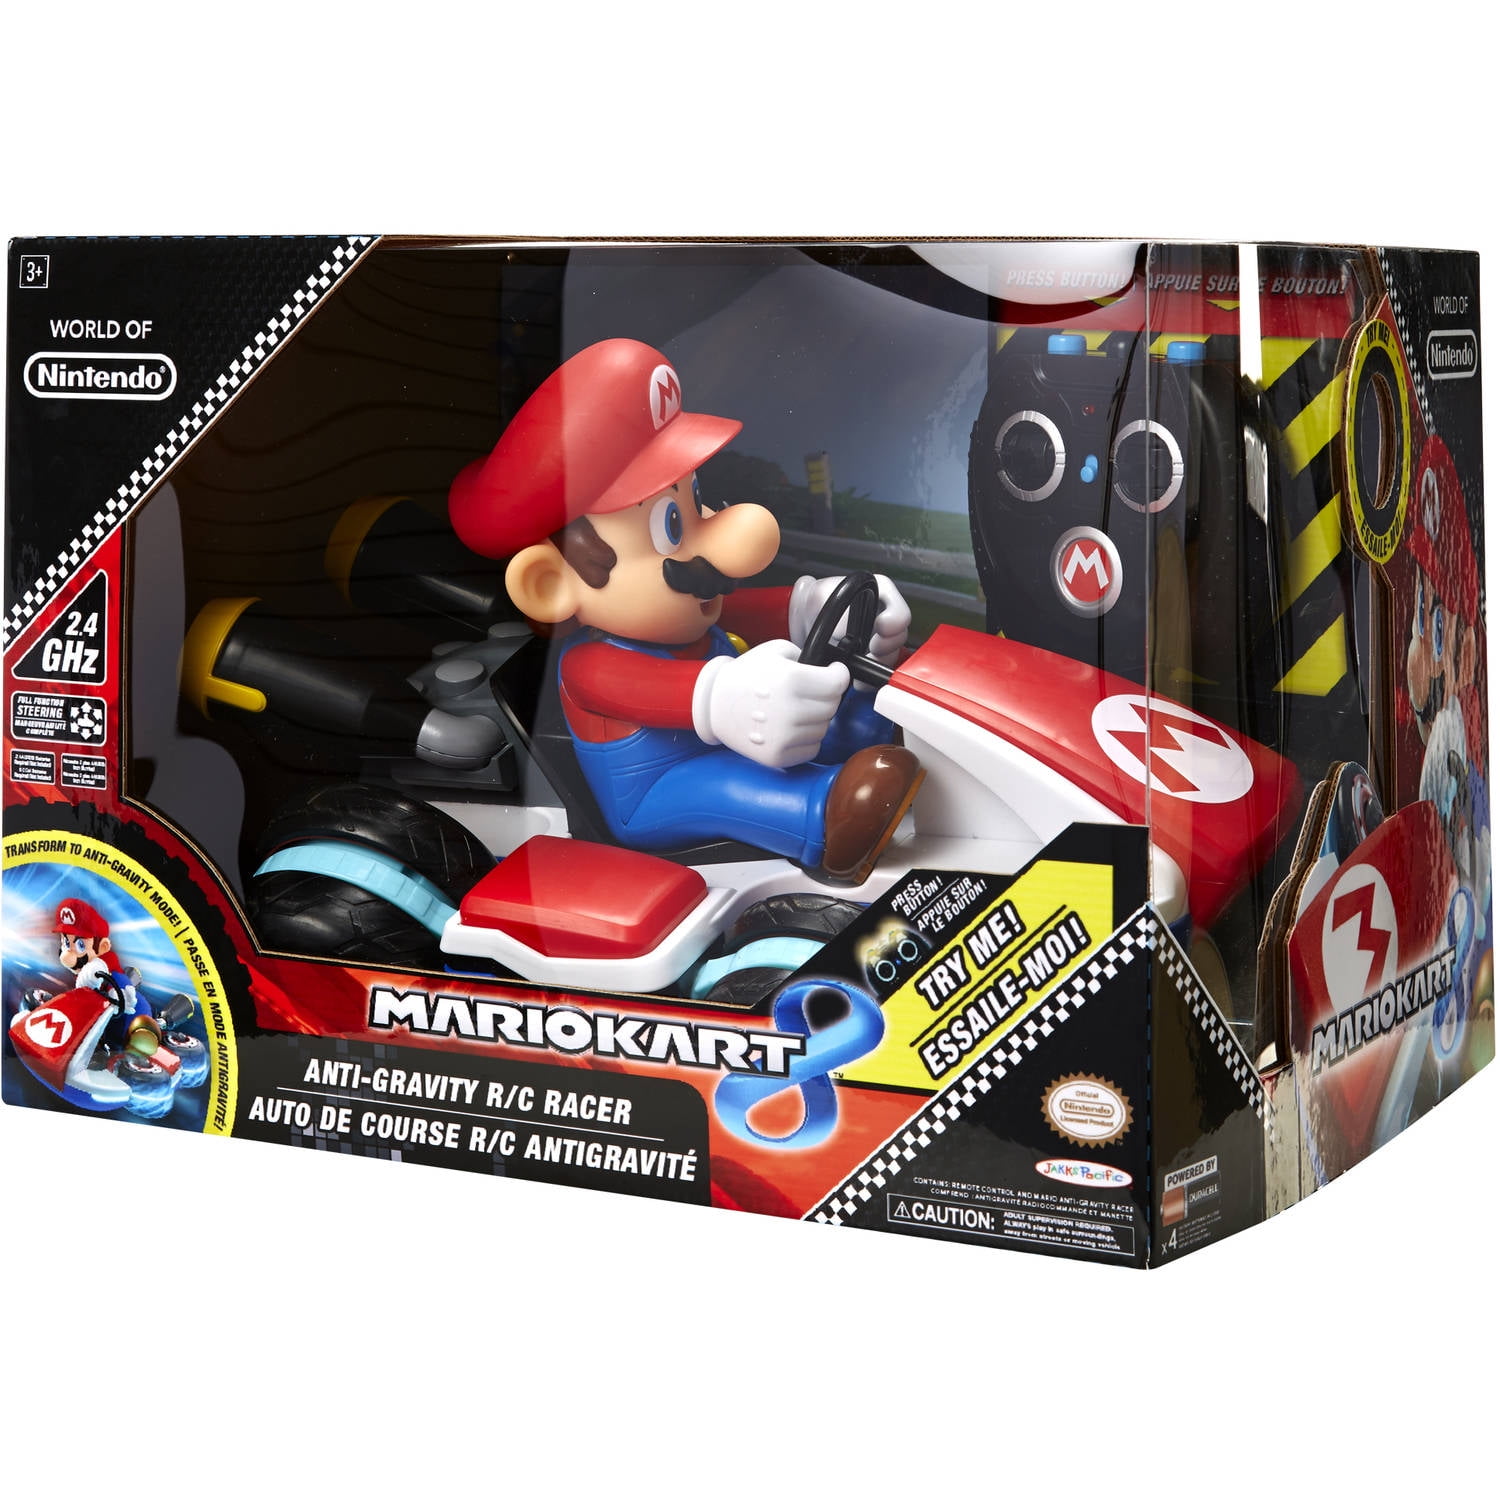 Nintendo's new remote-control toy brings real Mario Kart races home, Games